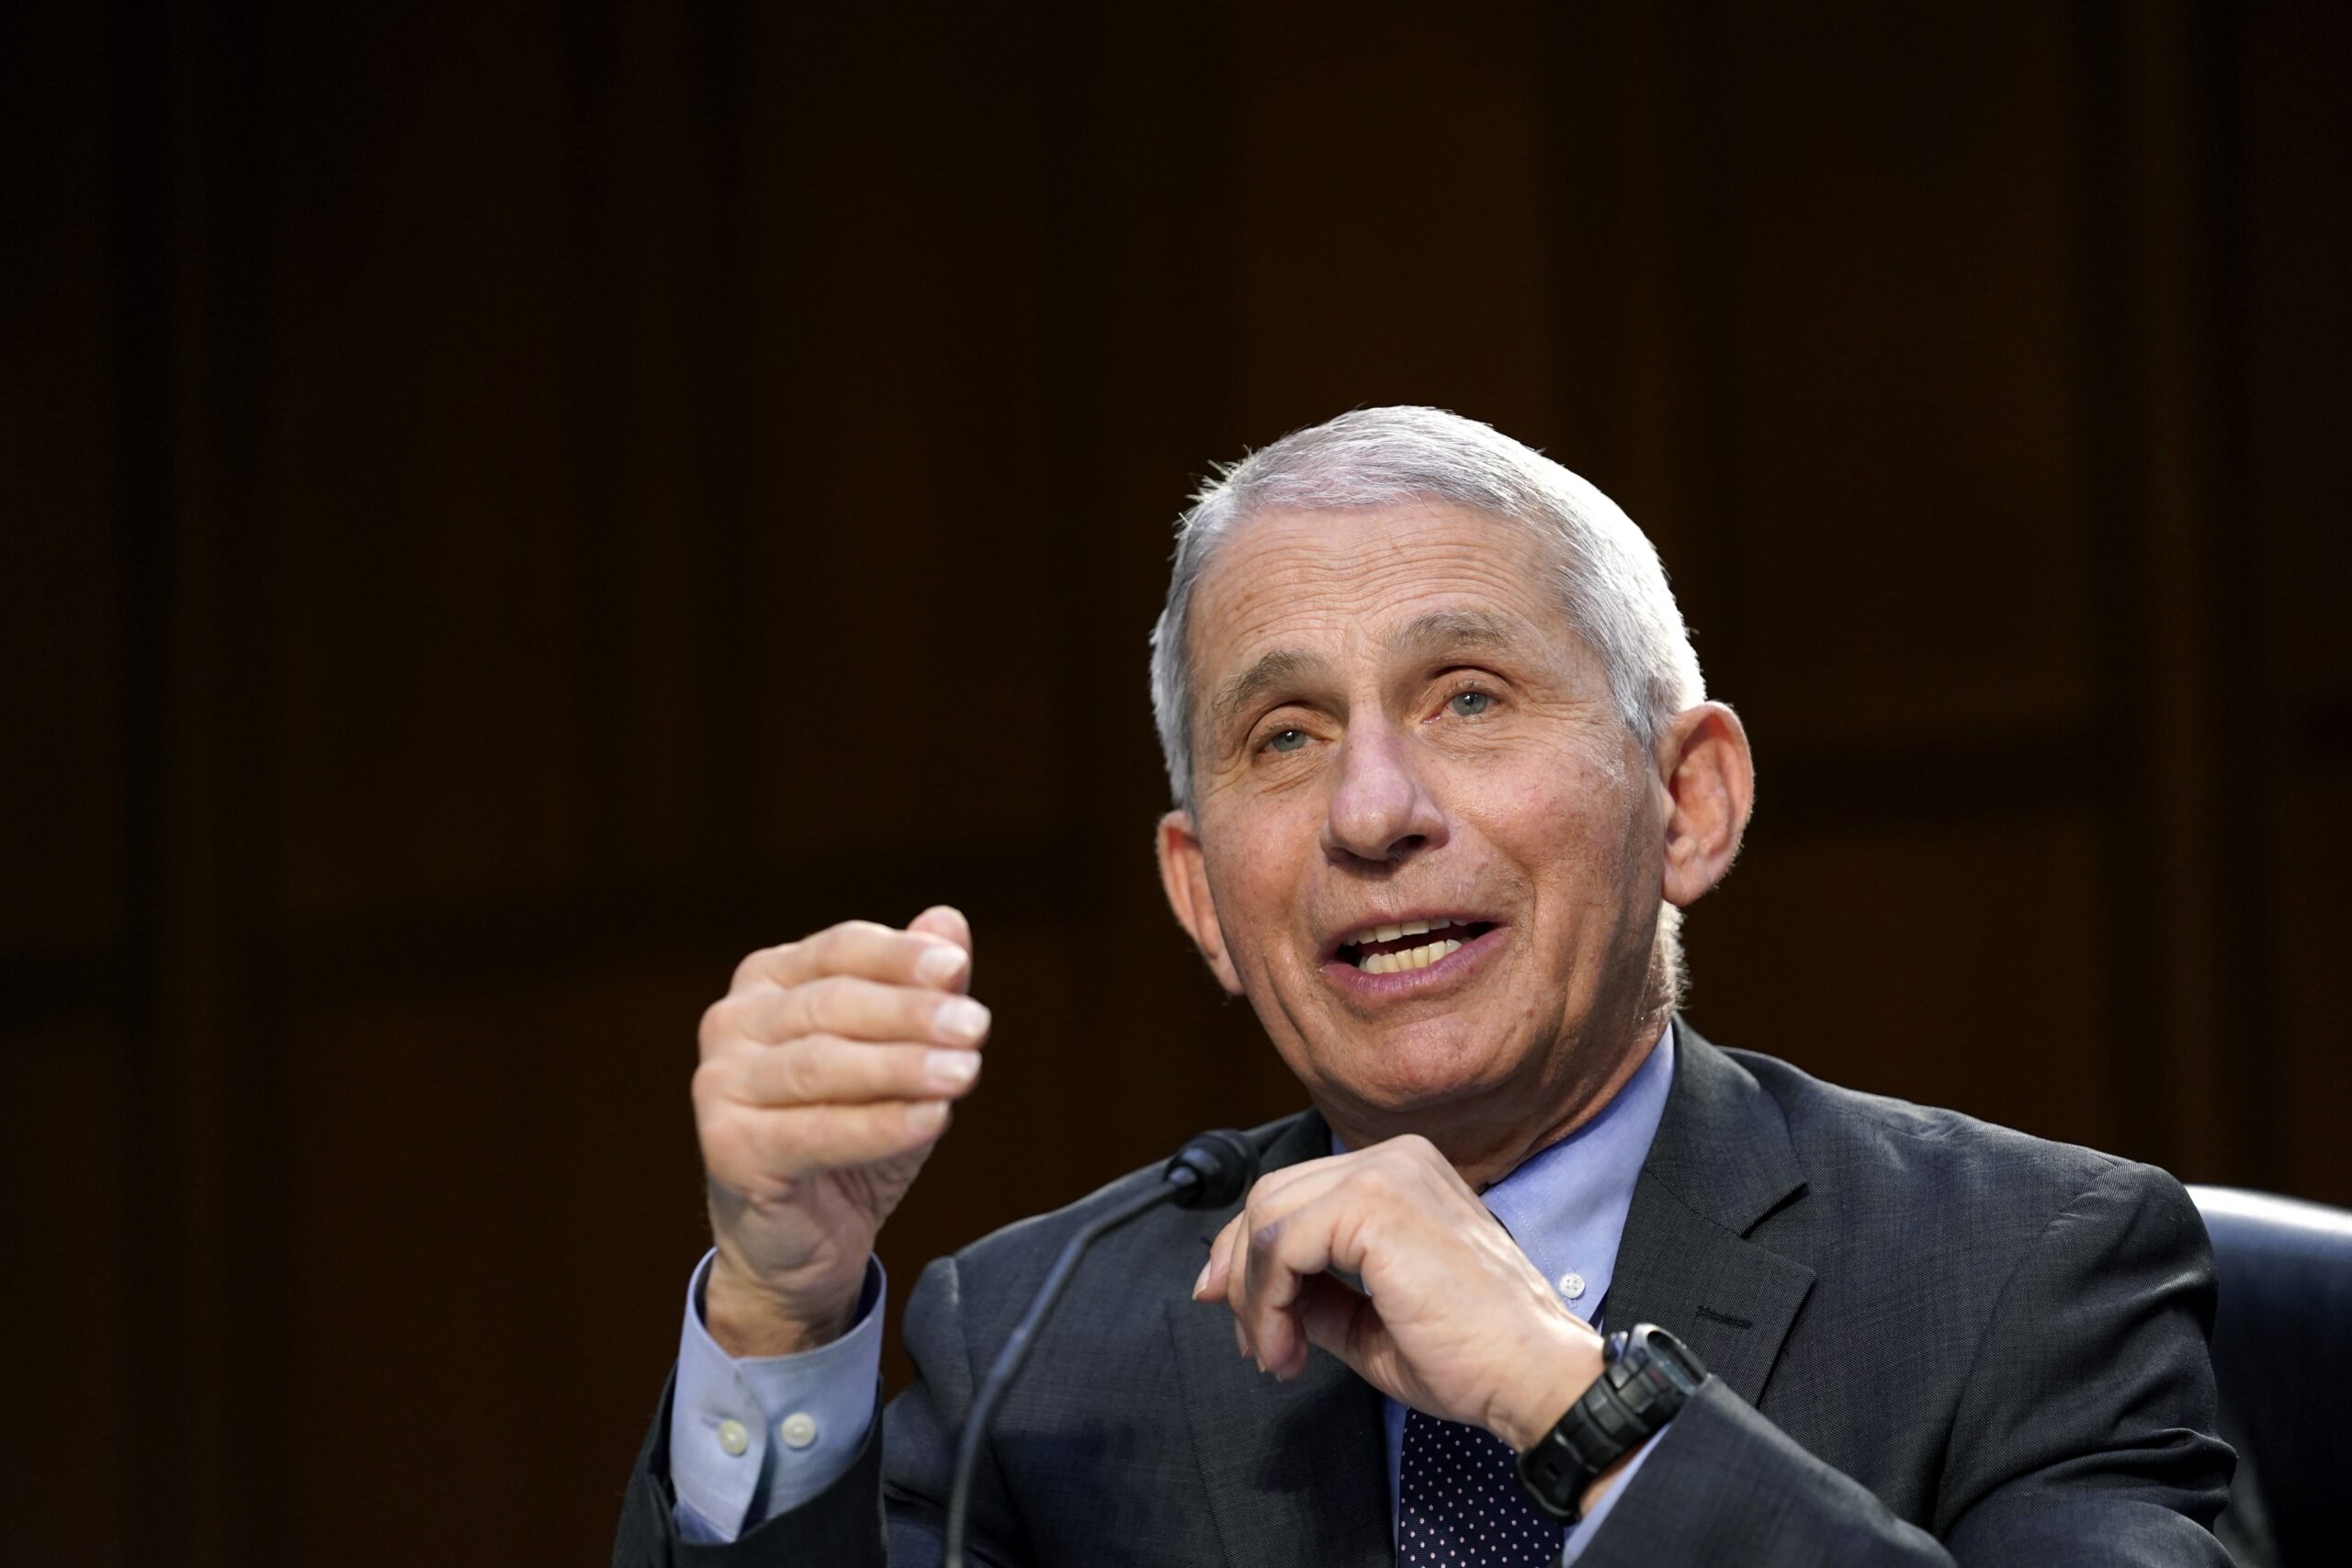 Dr. Anthony Fauci testifies during a Senate Health, Education, Labor and Pensions Committee hearing